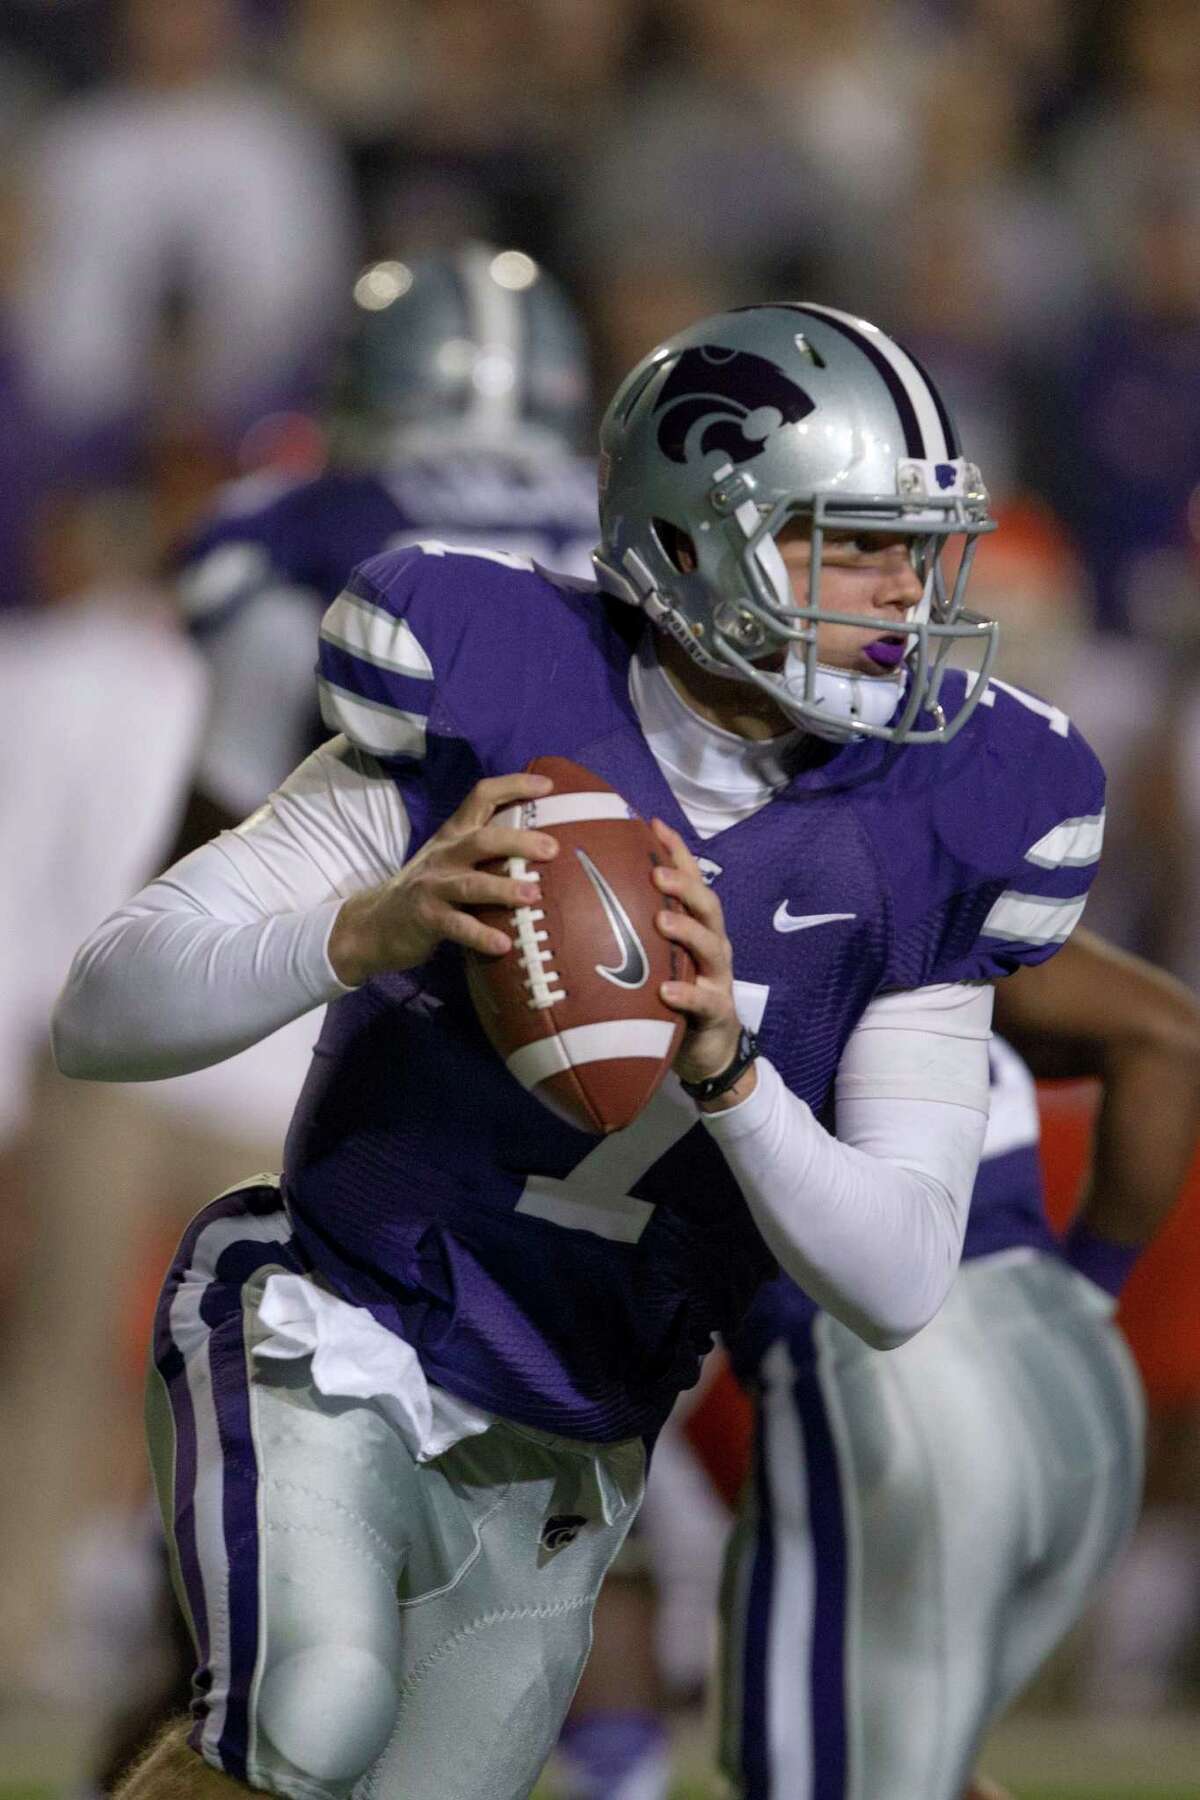 Kansas State quarterback Collin Klein (7) during the first half of an NCAA college football game against Oklahoma State in Manhattan, Kan., Saturday, Nov. 3, 2012. (AP Photo/Orlin Wagner)